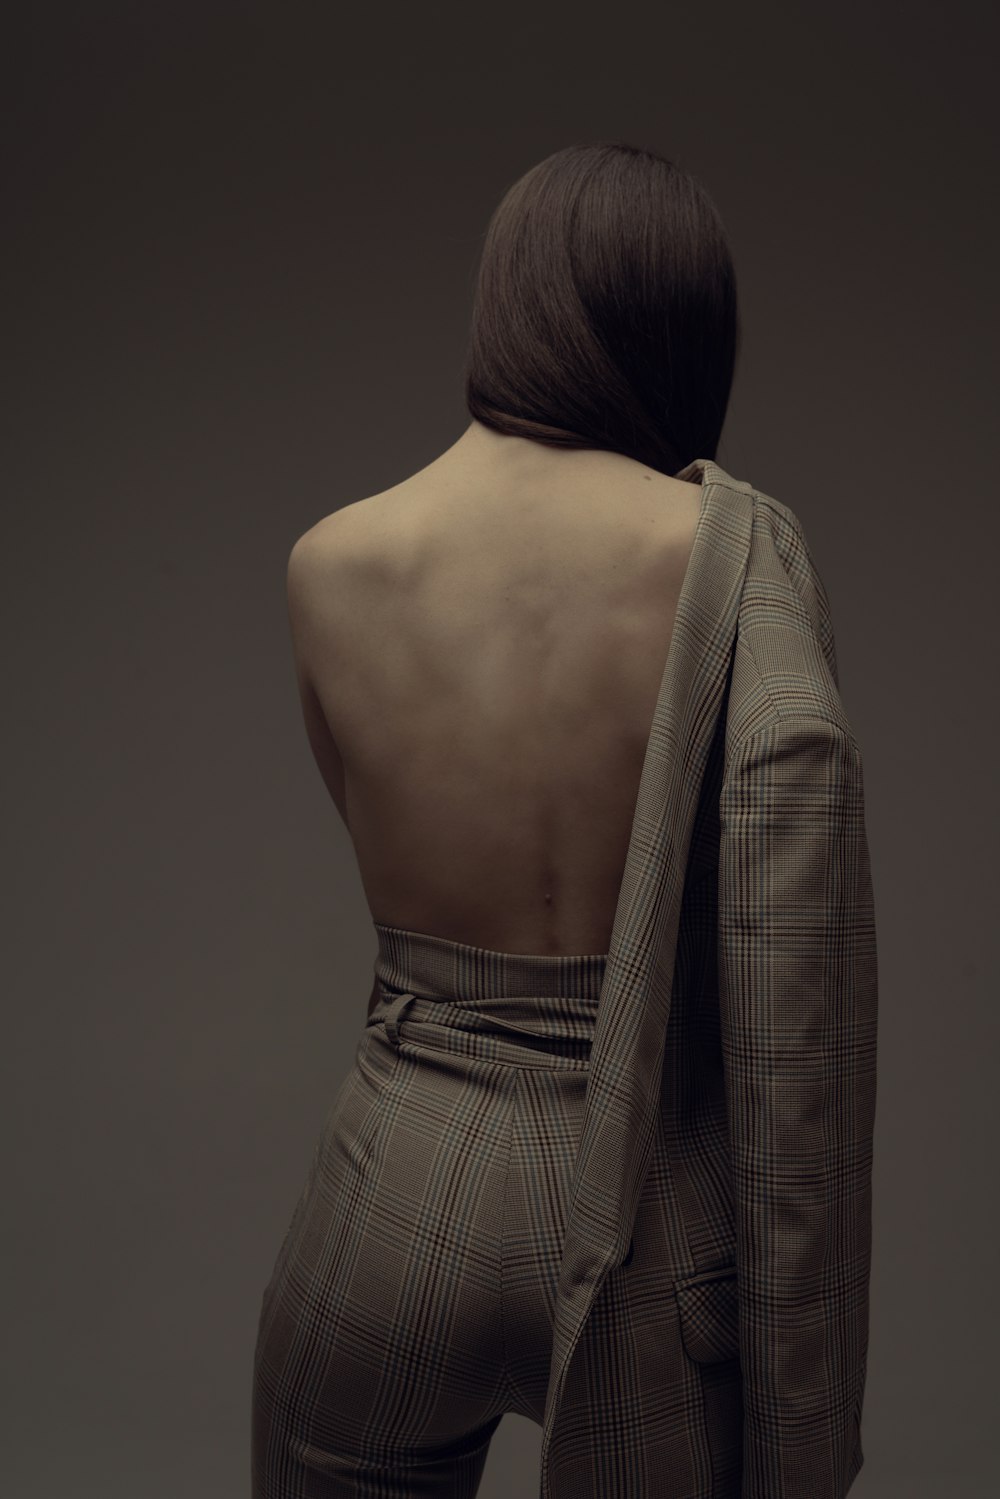 a woman in a suit with her back to the camera